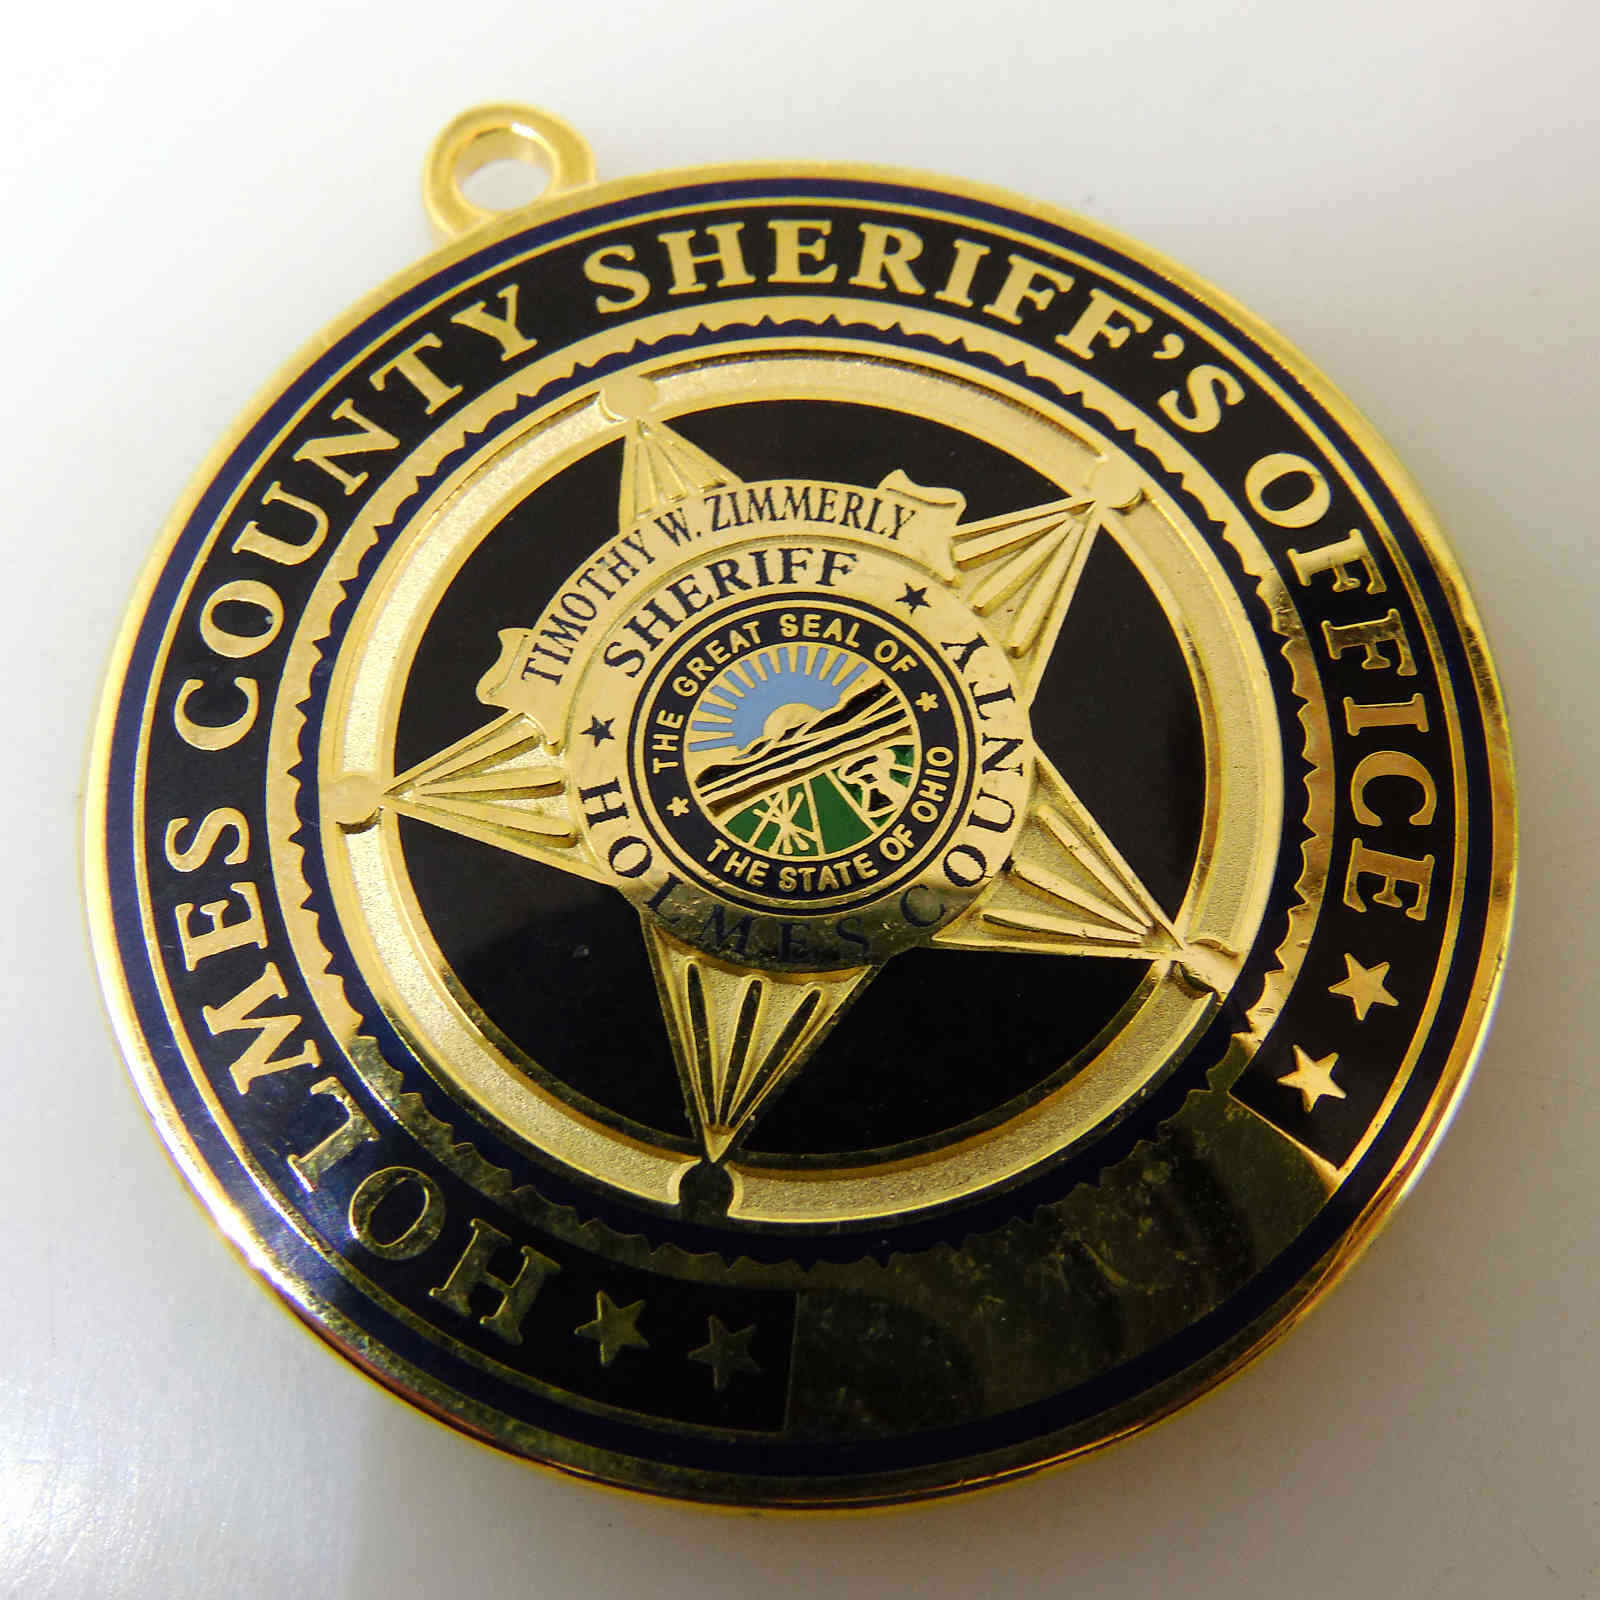 HOLMES COUNTY SHERIFF OFFICE CHALLENGE COIN